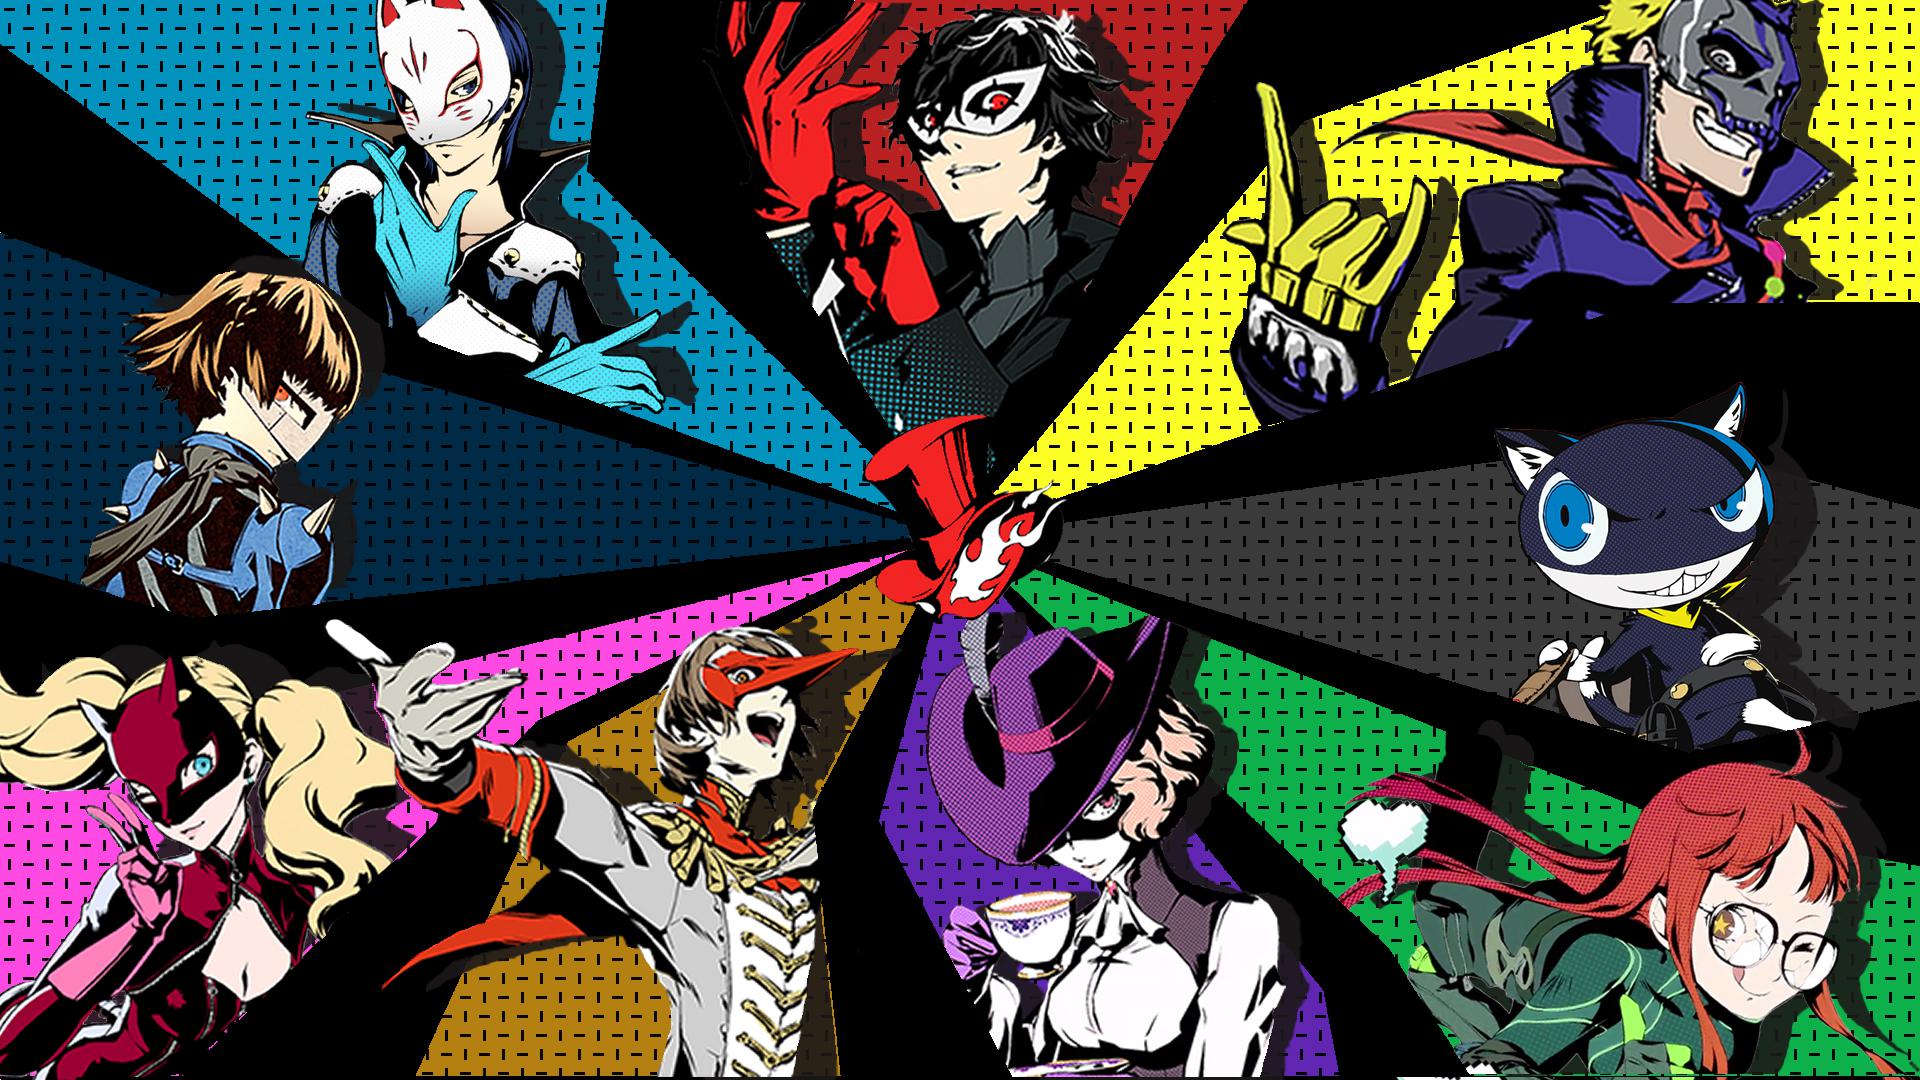 Phantom Thieves Background I Made With Their All Out Attack Portrait (Link In Comments)